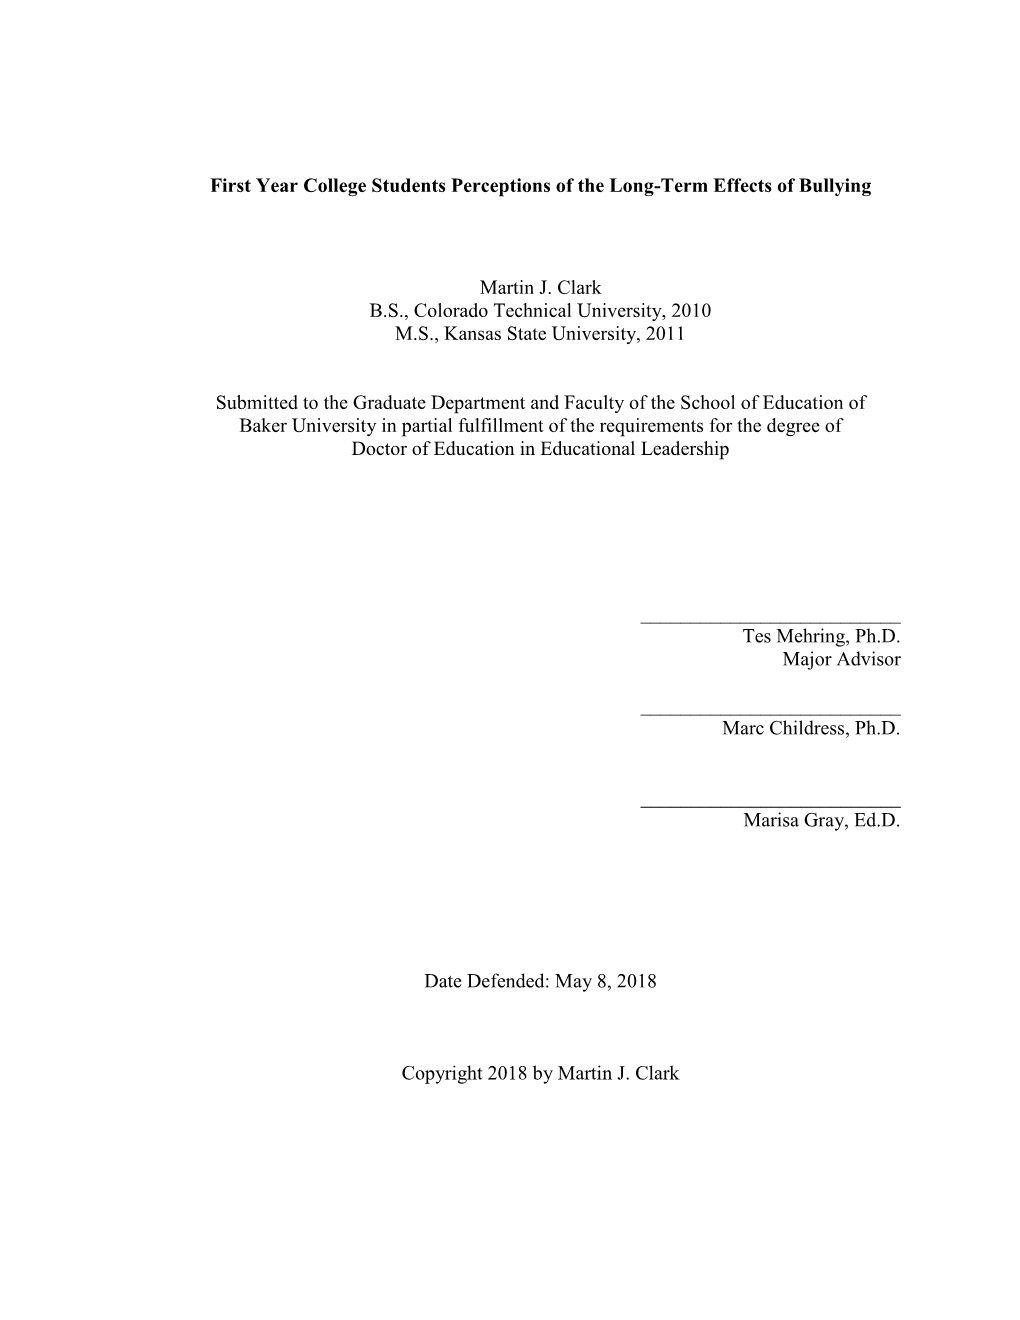 First Year College Students Perceptions of the Long-Term Effects of Bullying